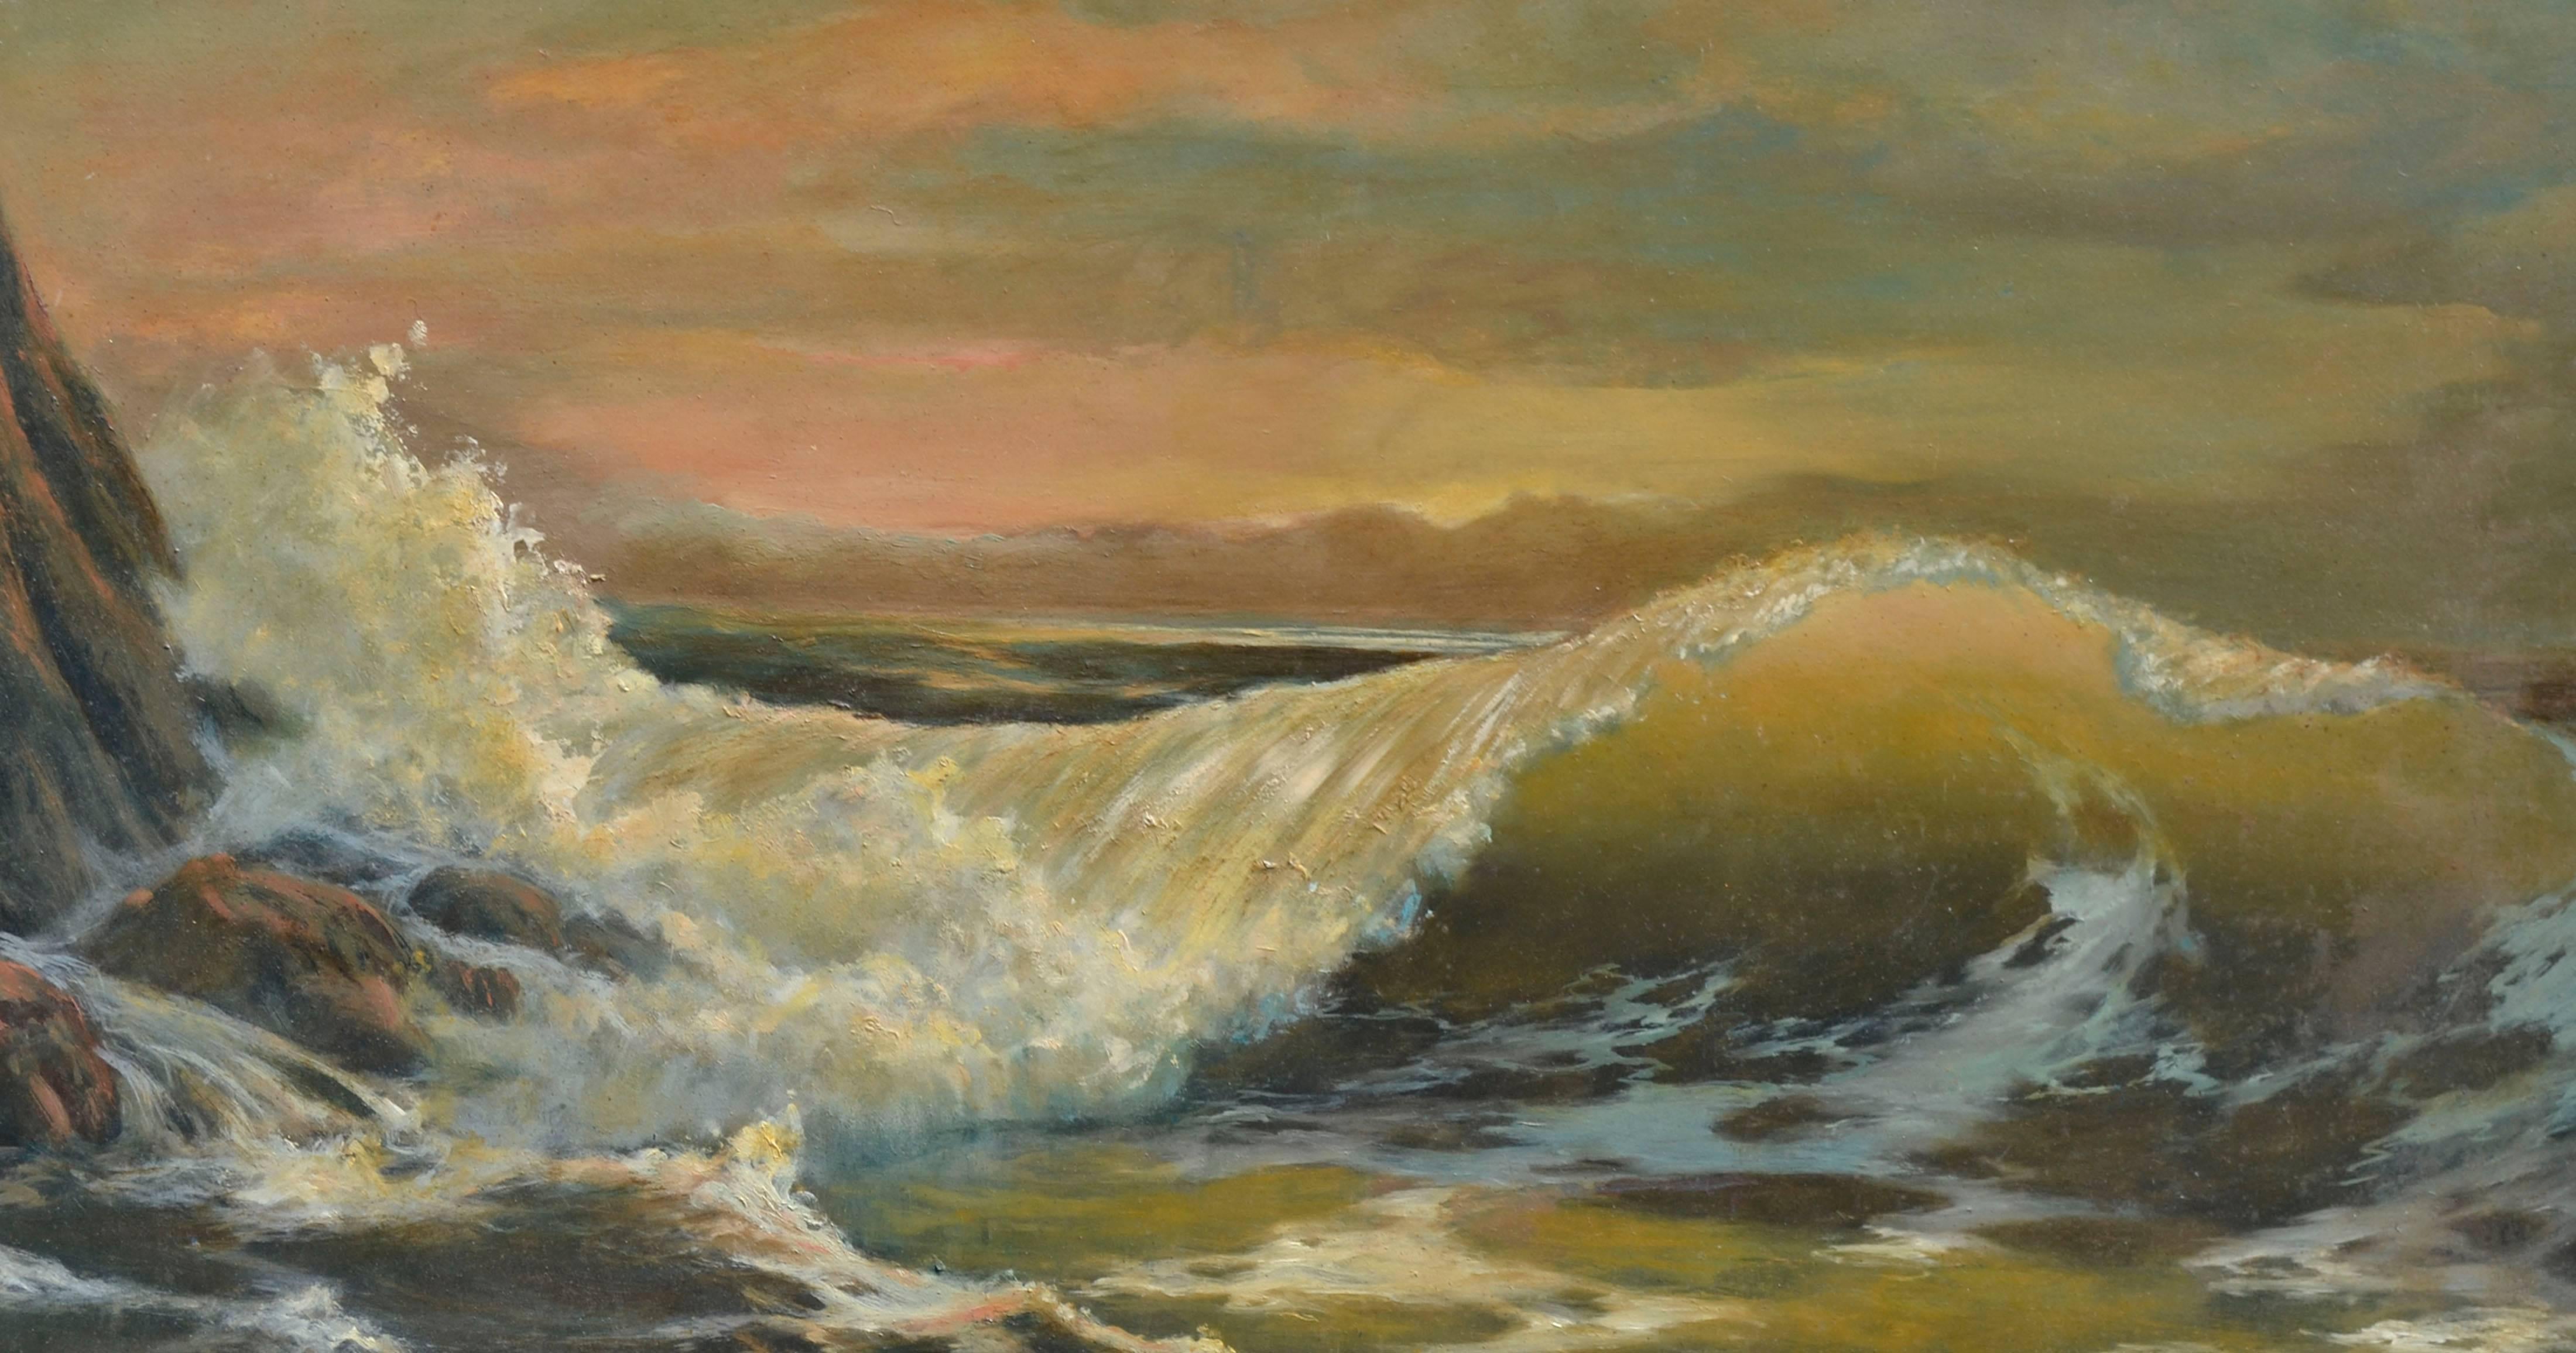 Translucent Wave - Painting by Cecil Clyde Lee Jr.